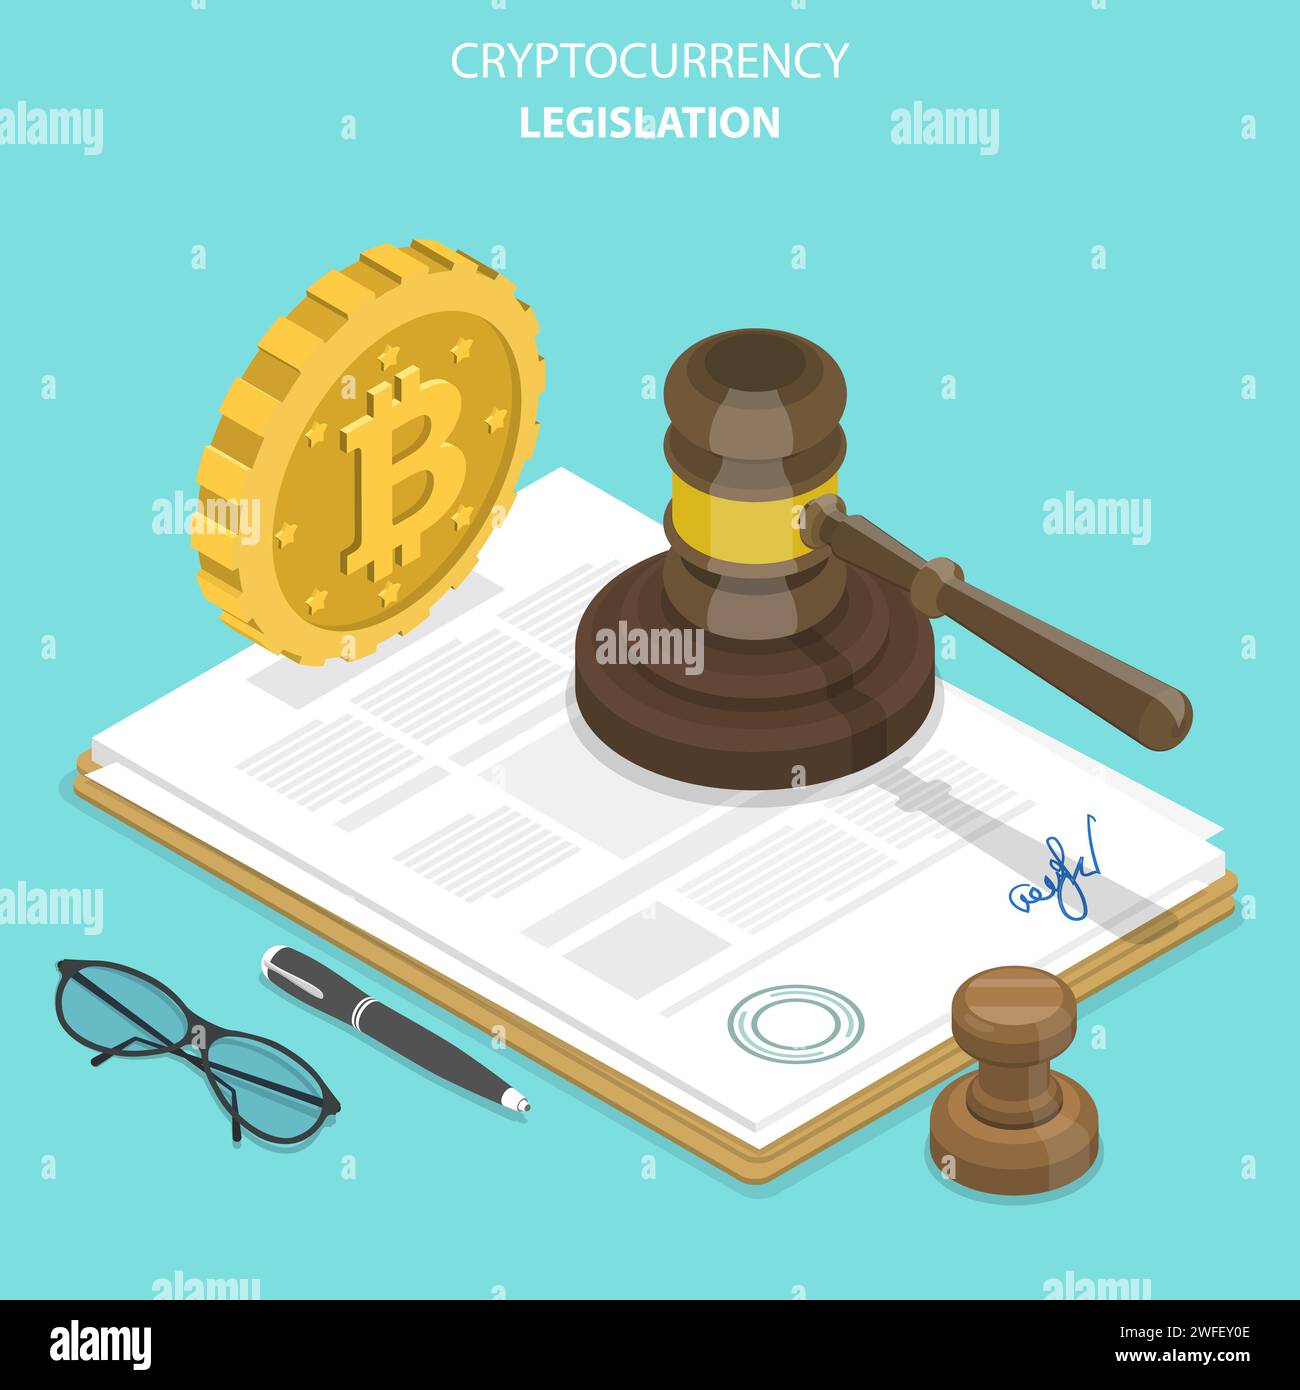 Cryptocurrency legislation flat isometric vector concept. Signed document with bitcoin and gavel on it. Stock Vector